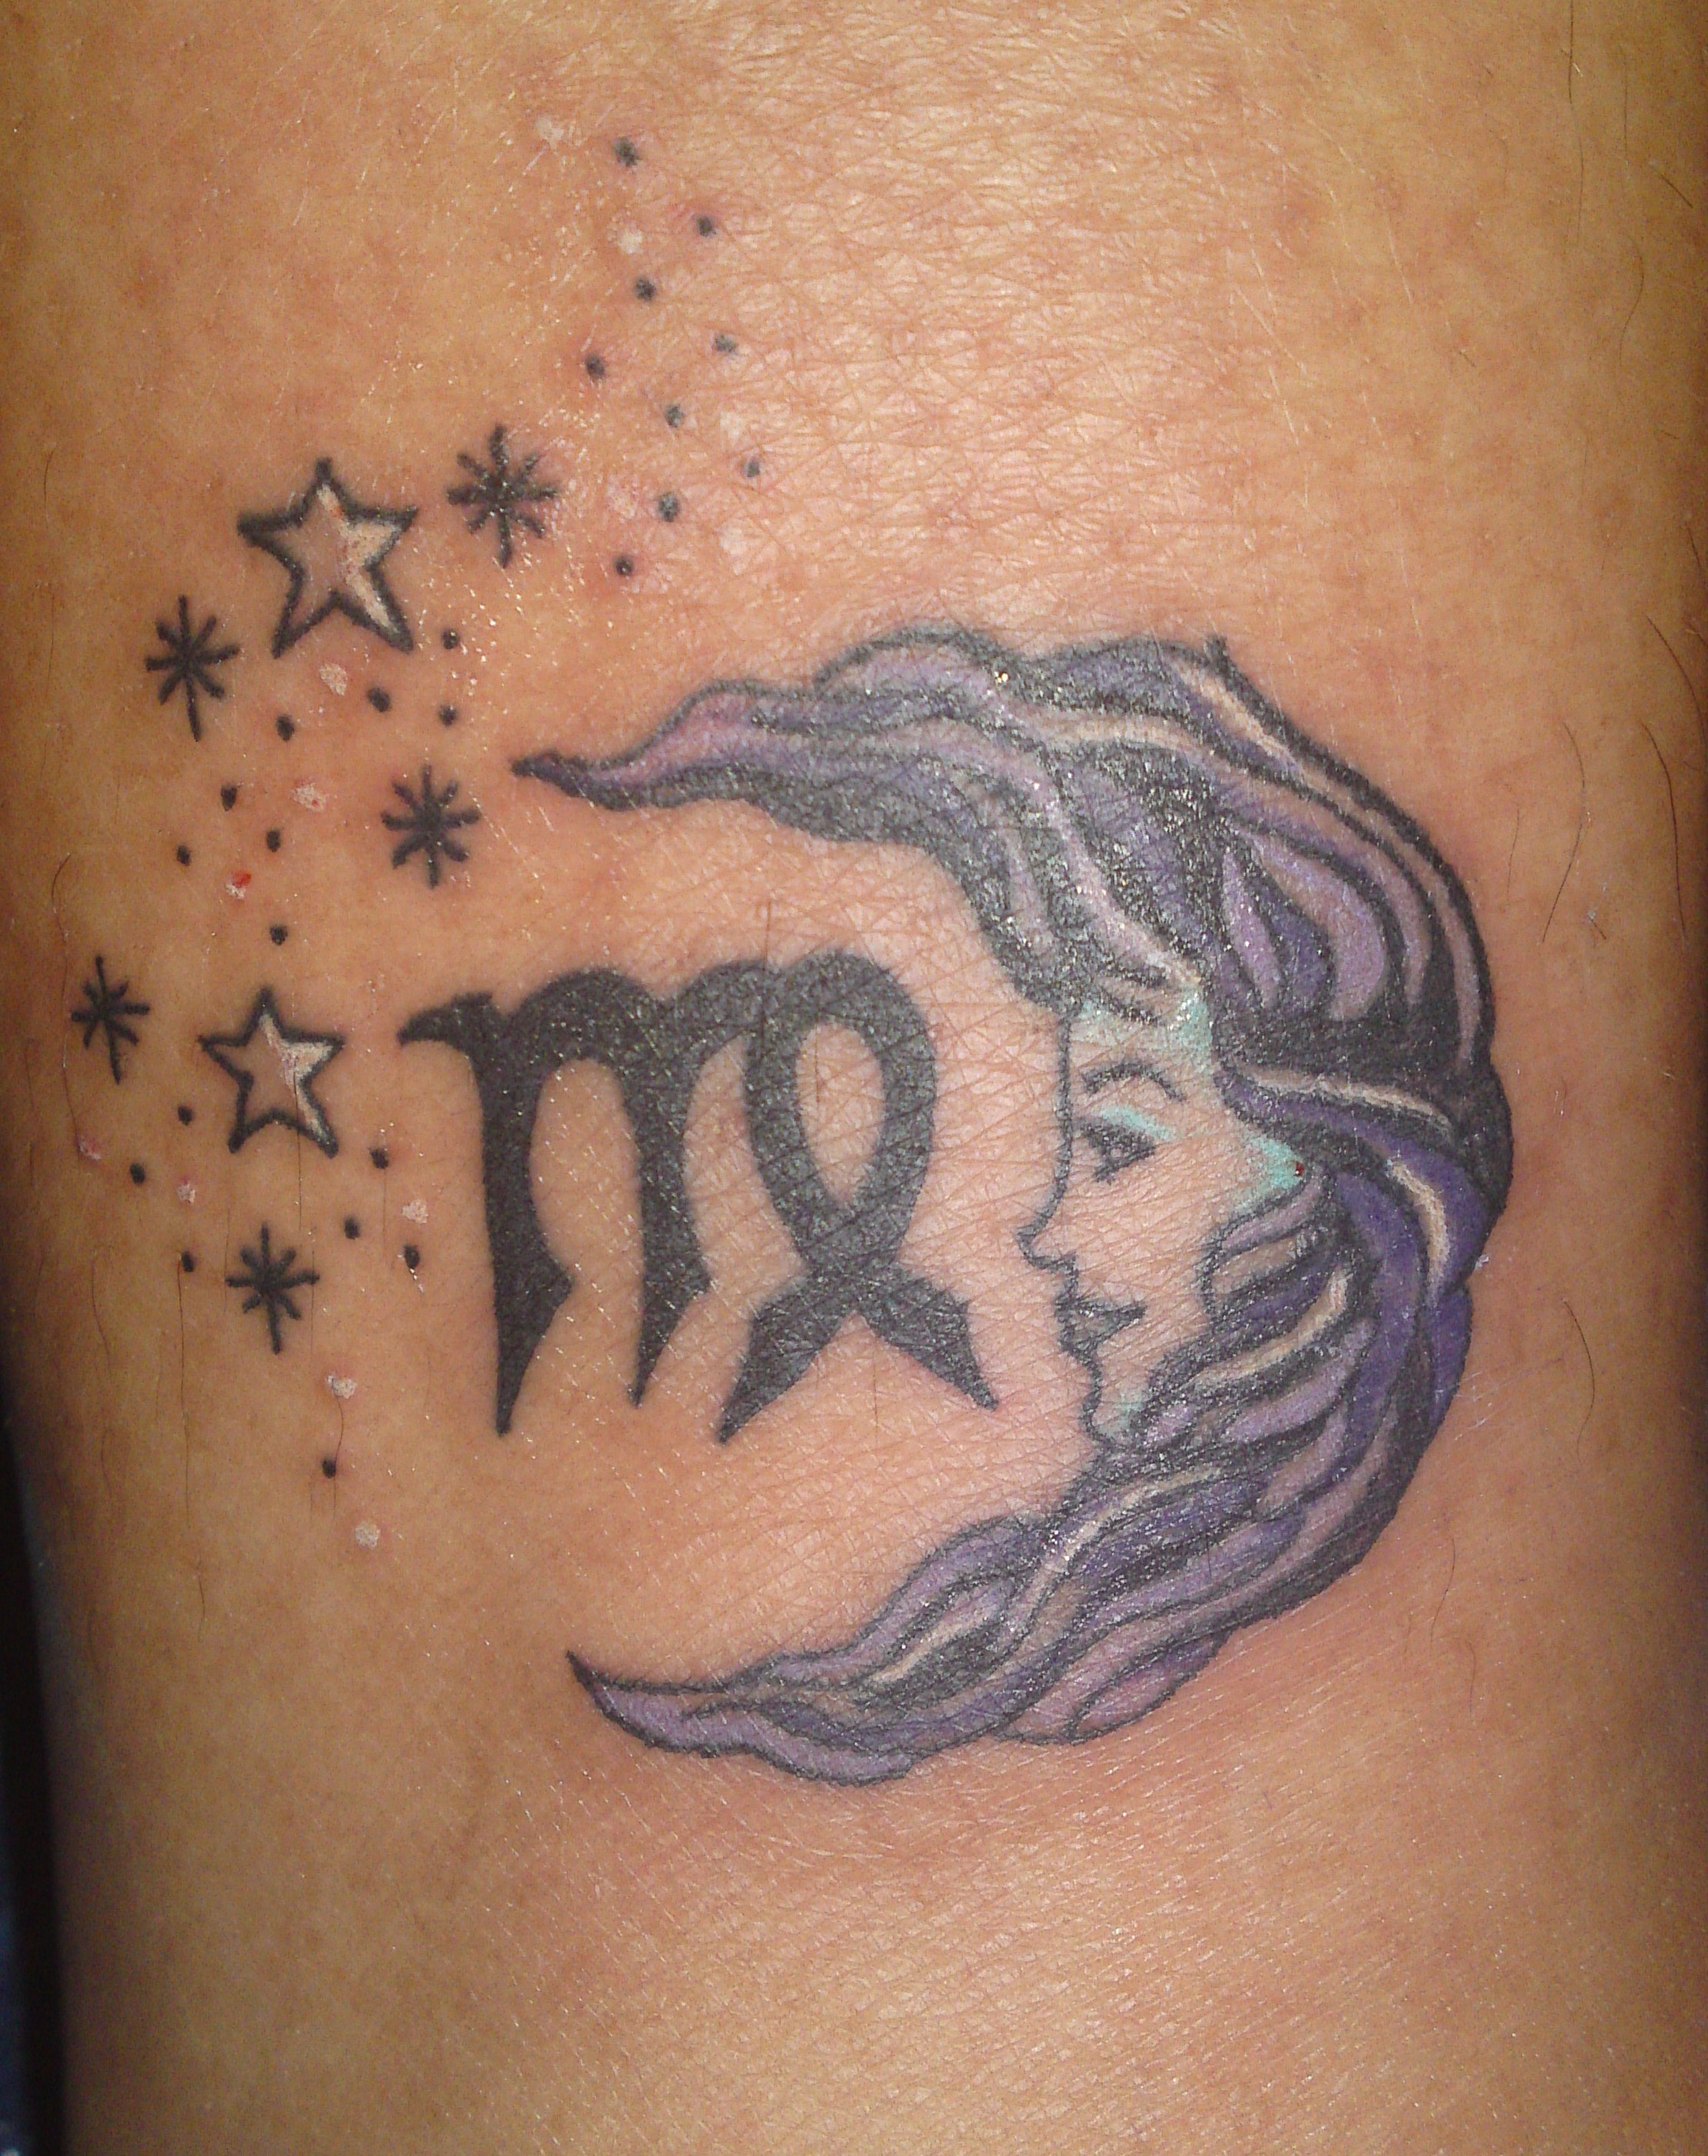 Virgo Tattoos Designs, Ideas and Meaning | Tattoos For You